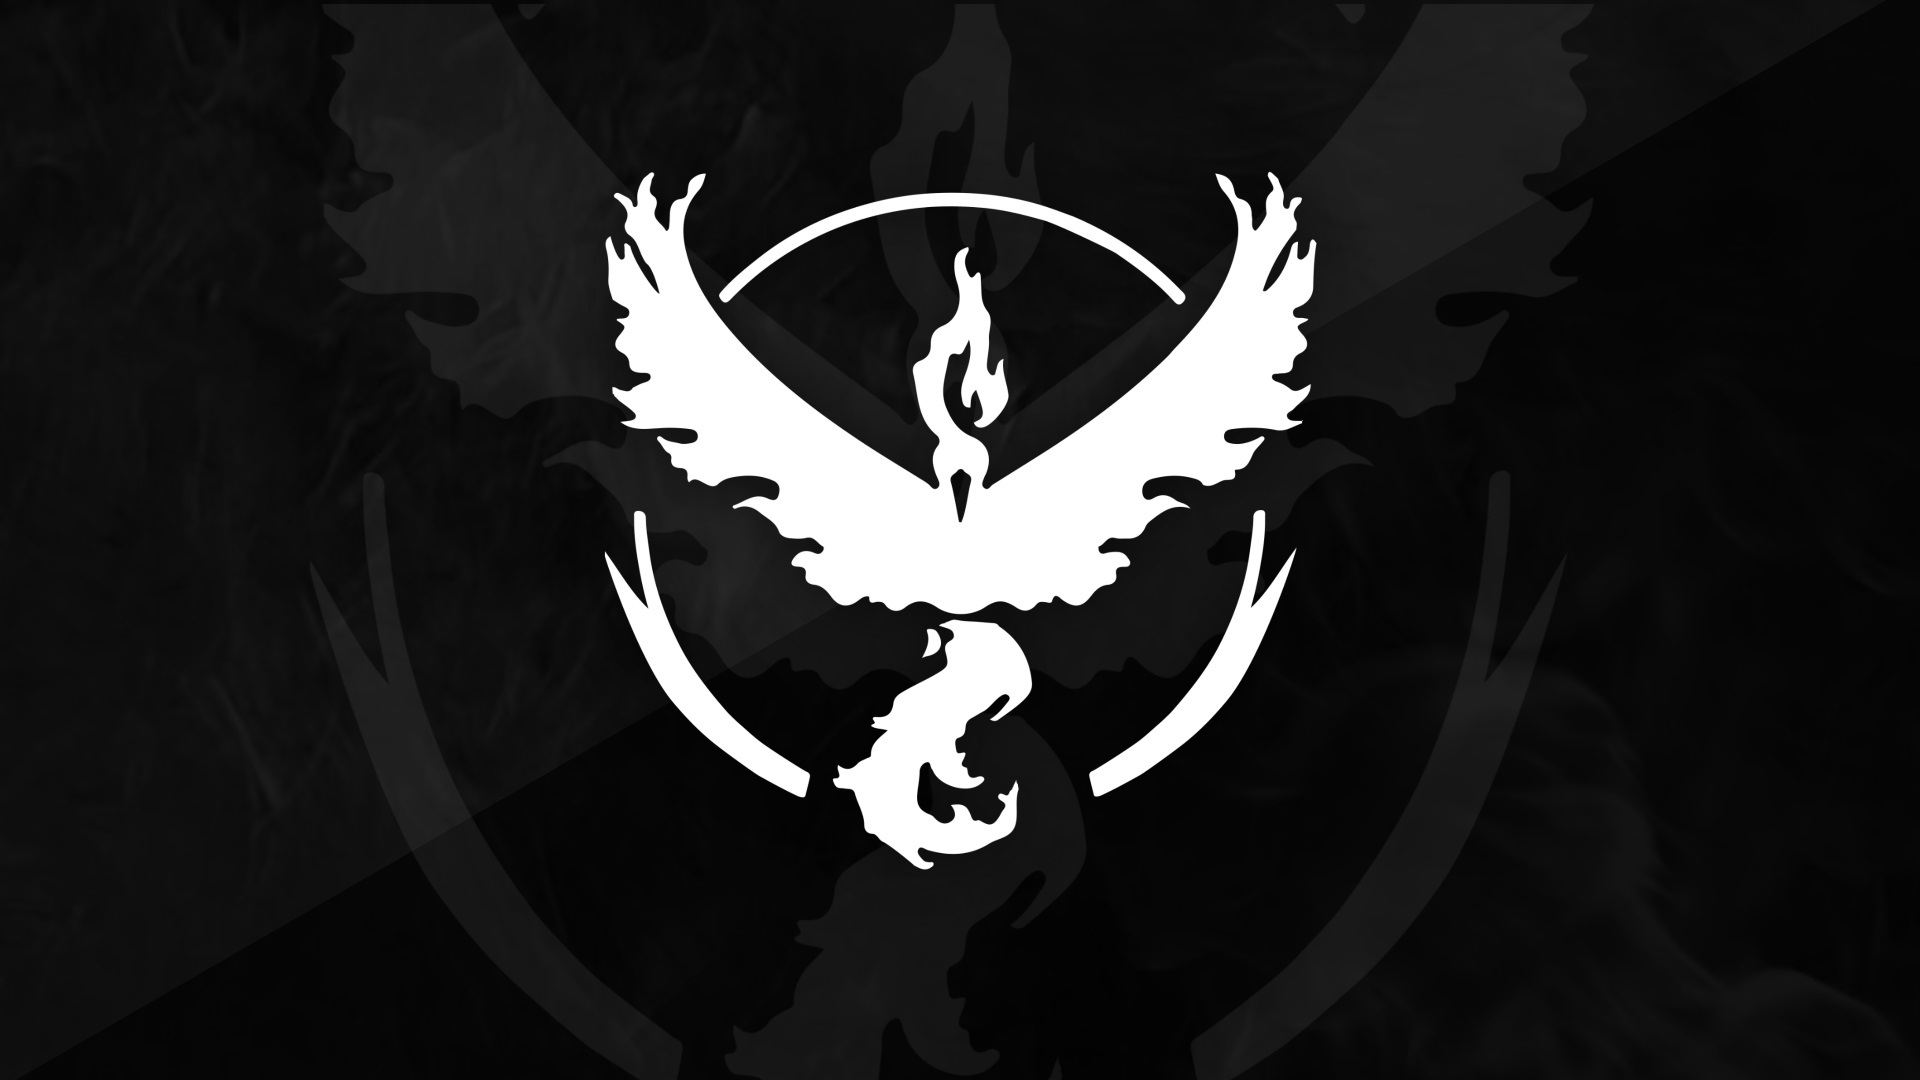 Team Valor in black and white by Tommaso Tabacchi